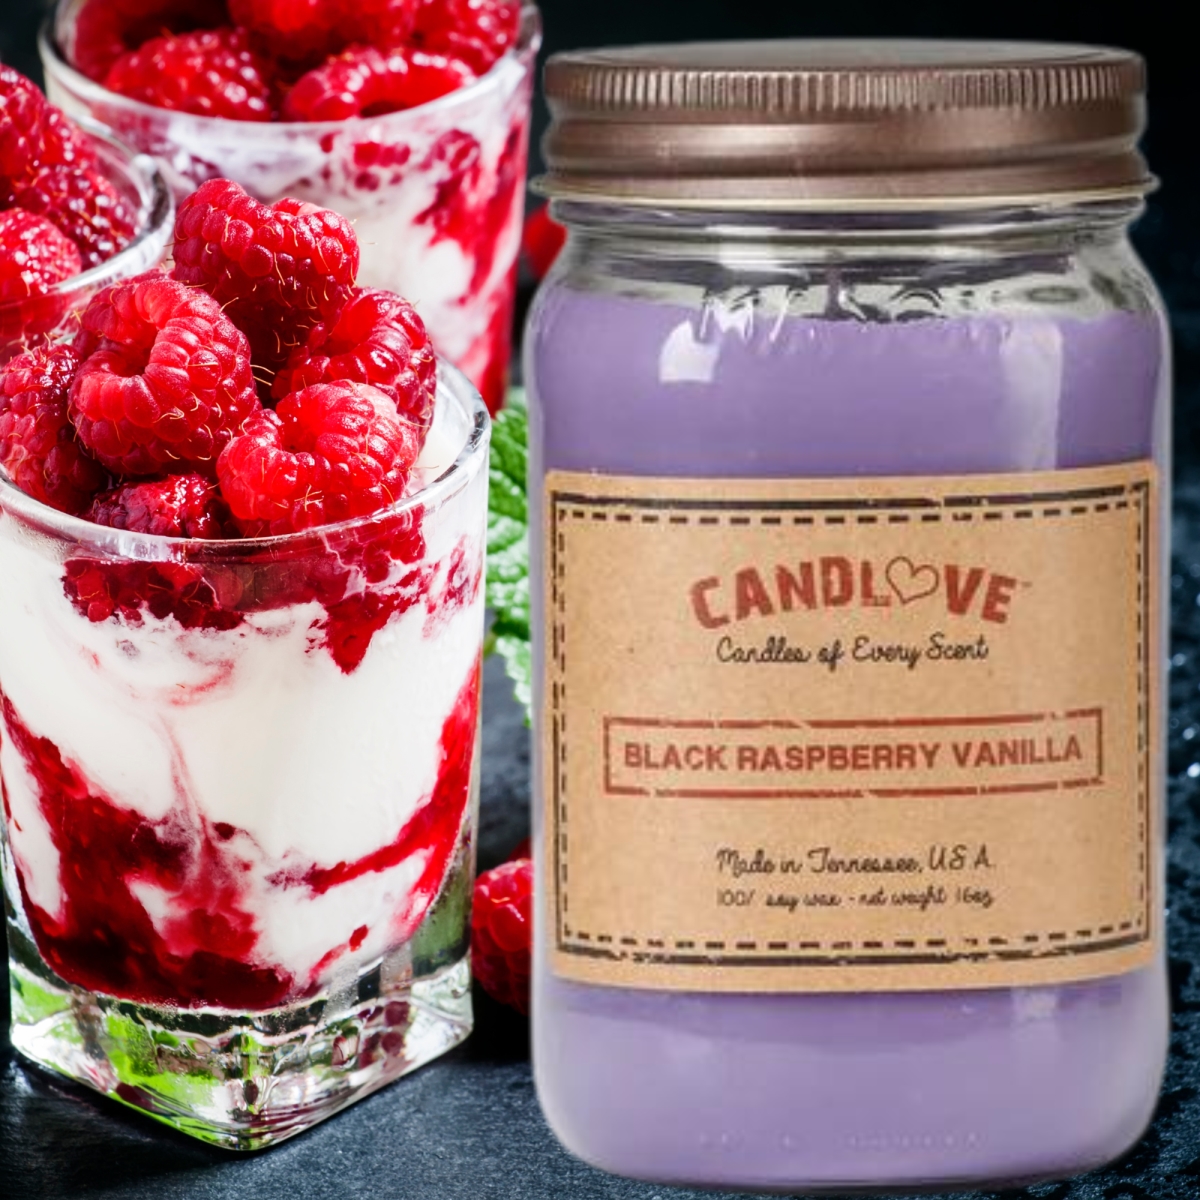 Picture of PPI SUPPLIES Black-RV-C Candlove Black Raspberry Vanilla Scented Candle - Non-Toxic 100% Soy Candle - Handmade & Hand Poured Long Burning Candle - Highly Scented All Natural Clean Burning Candle (16 OZ Mason Jar) Made in The USA